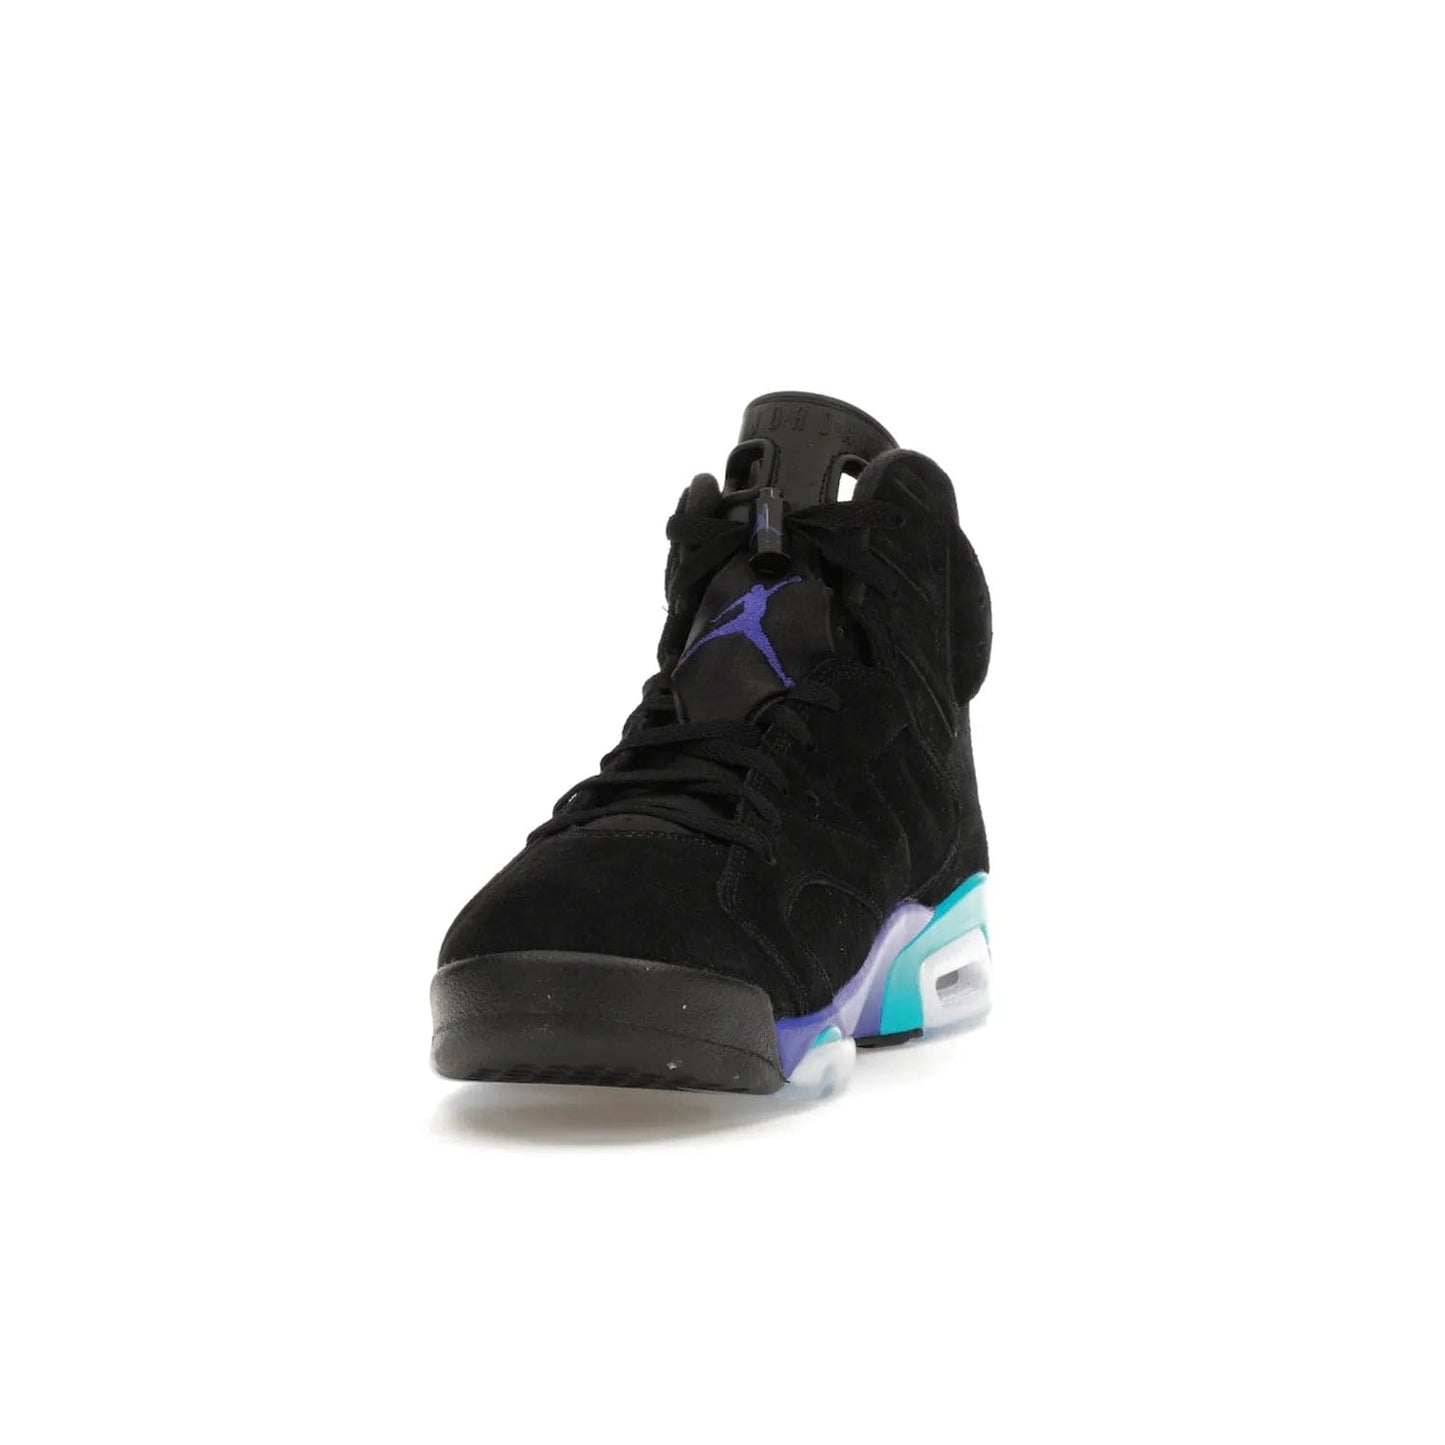 Jordan 6 Retro Aqua - Image 12 - Only at www.BallersClubKickz.com - Feel the classic Jordan 6 Retro Aqua paired with modern style. Black, Bright Concord, and Aquatone hues are crafted with a supple suede and rubberized heel tab. This standout sneaker adds signature Jordan elements at $200. Elevate your style with the Jordan 6 Retro Aqua.